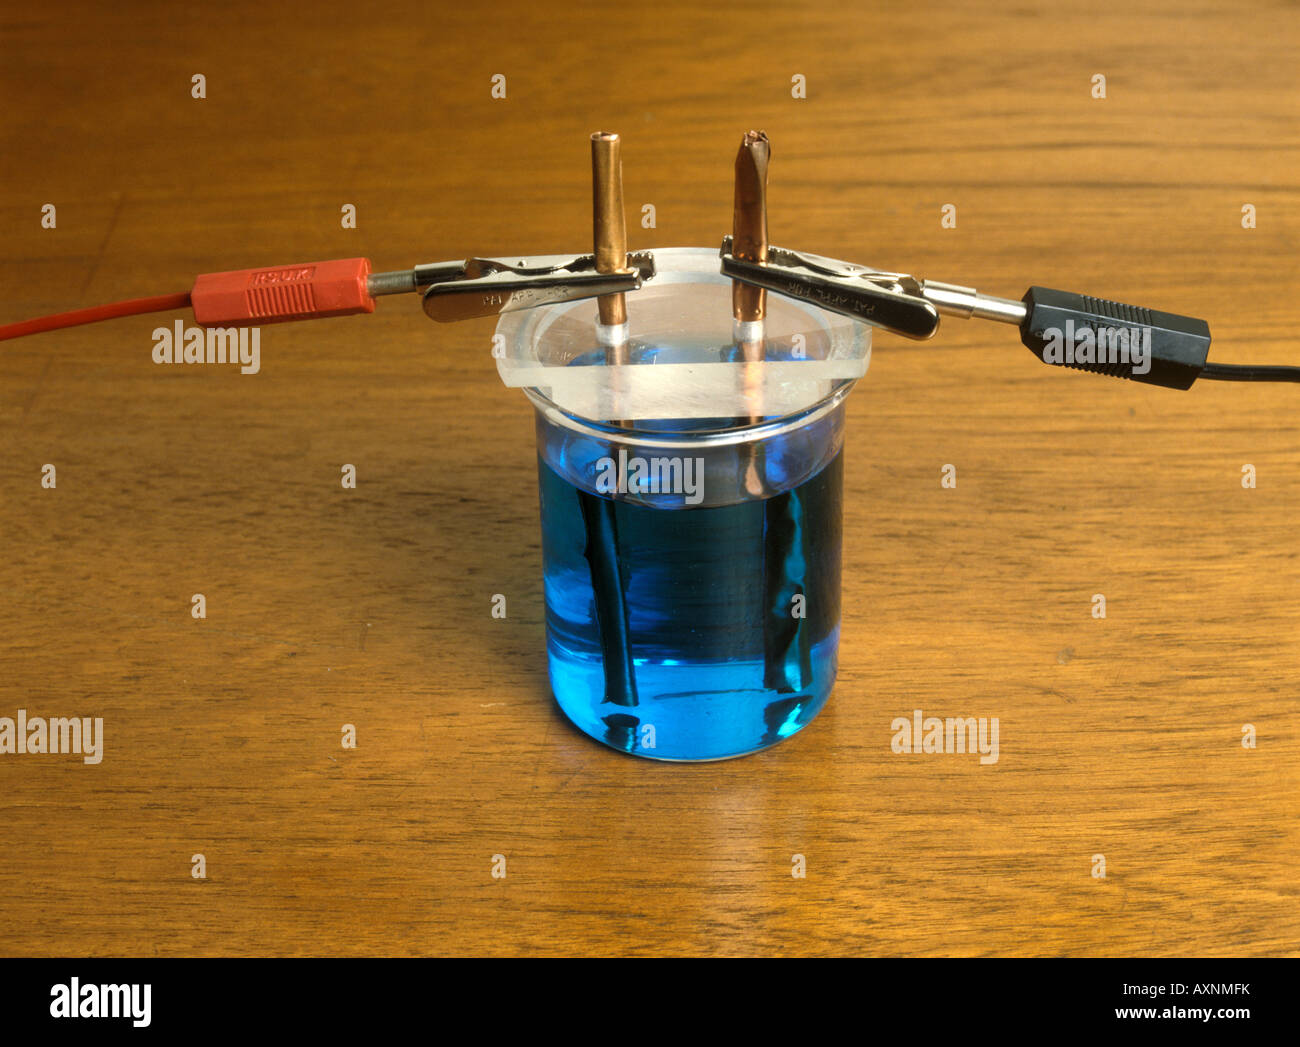 Electrolysis of copper sulphate solution using copper electrodes Stock Photo